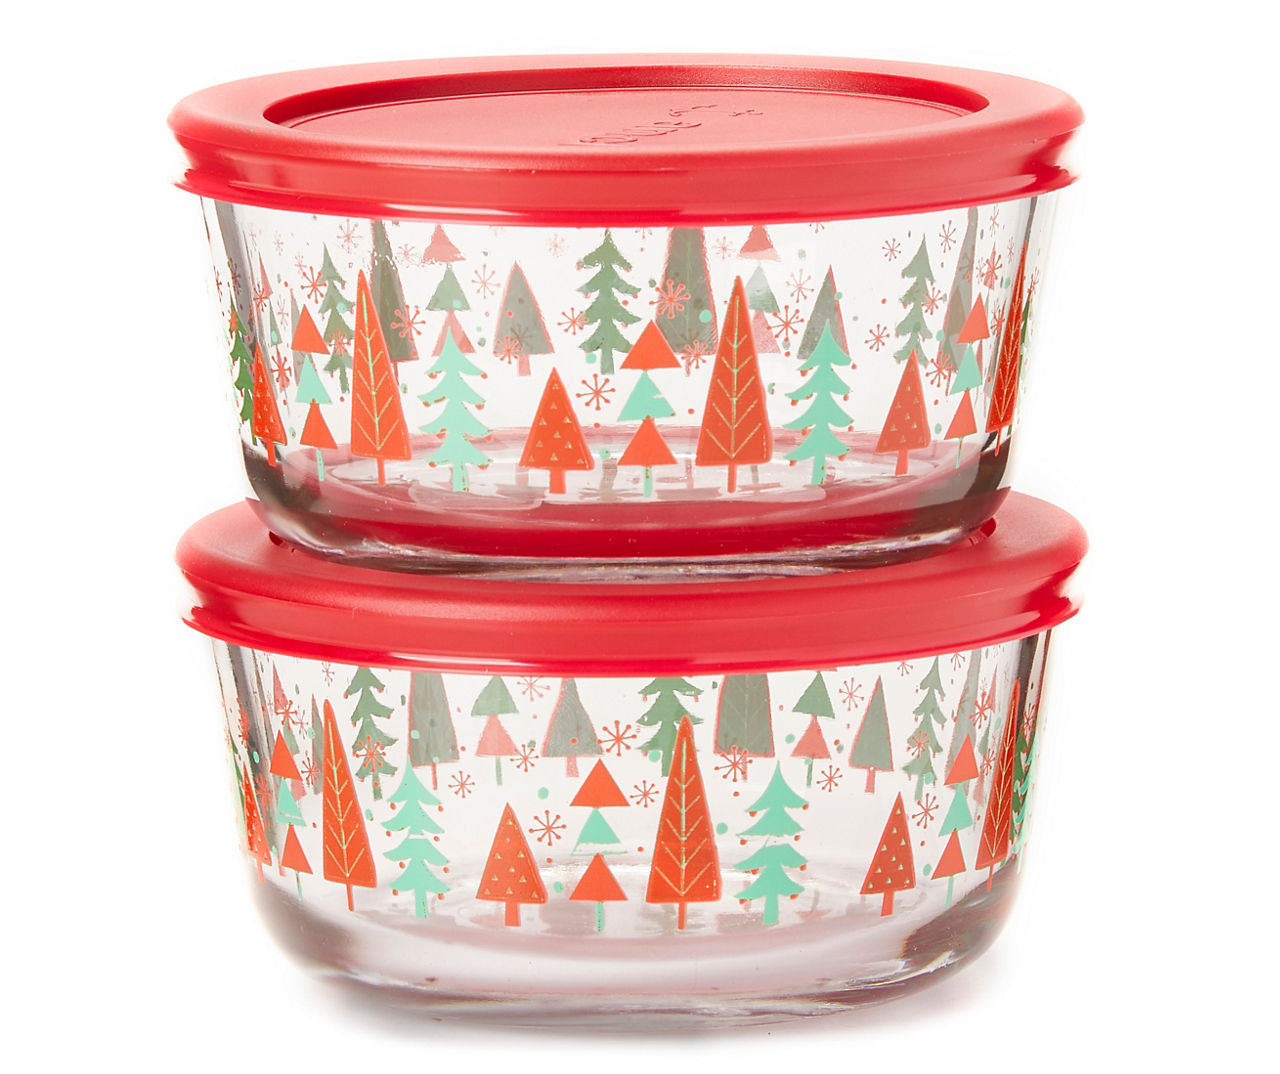 16oz 4pk Glass Food Storage Containers with Lids - Retro Holiday Red